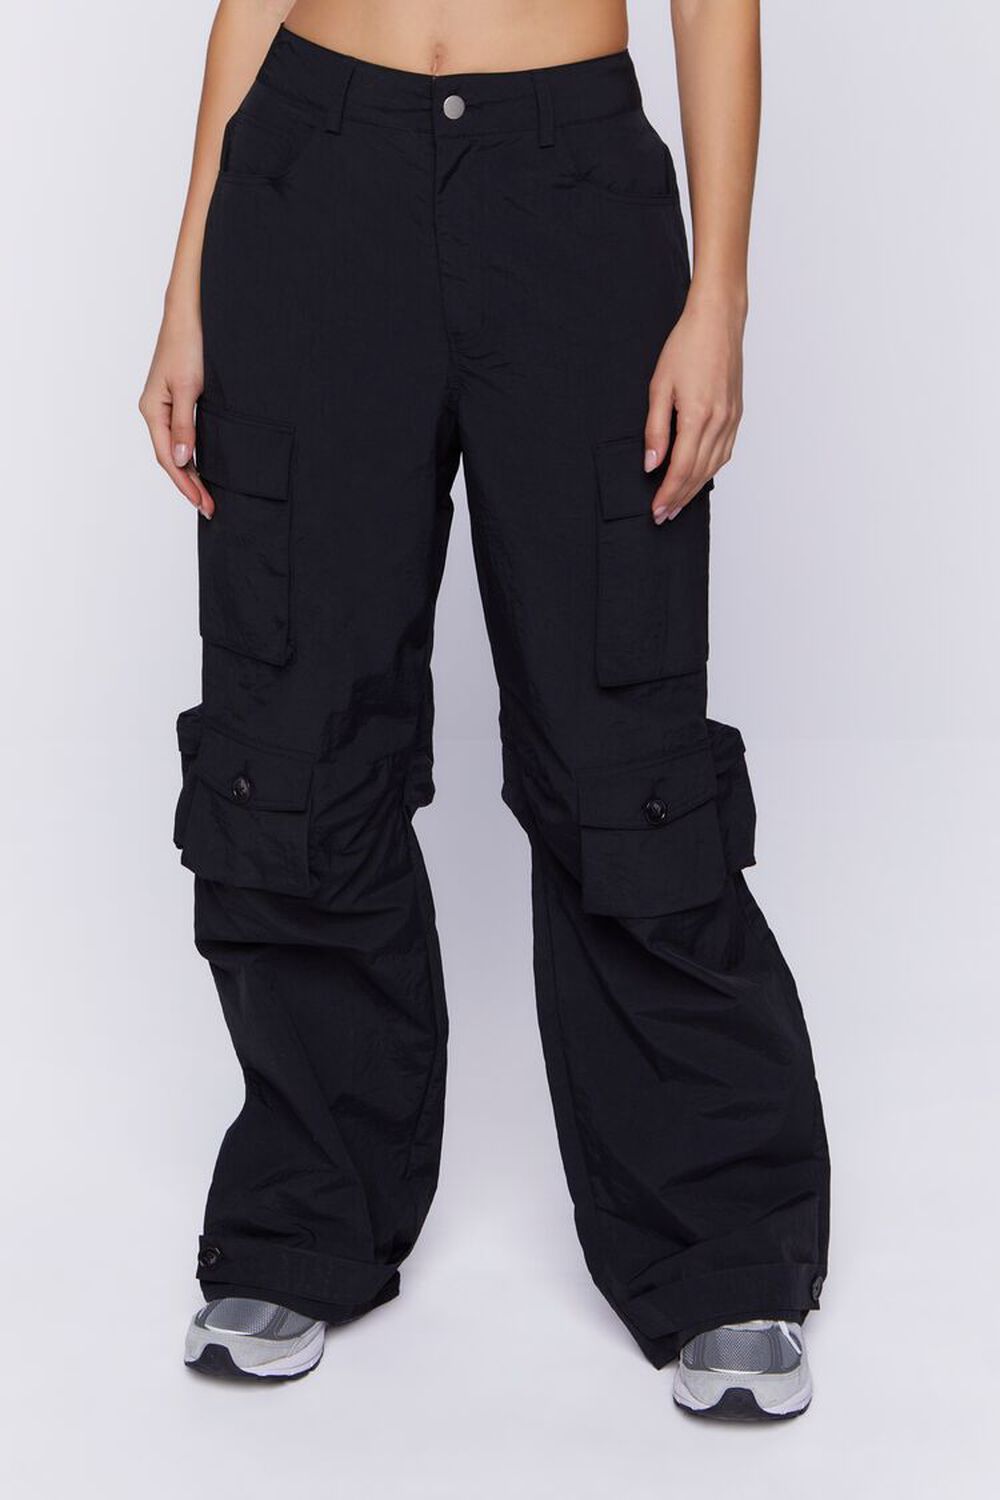 BDG Urban Outfitters New Y2K Womens Cargo Pants - BLACK